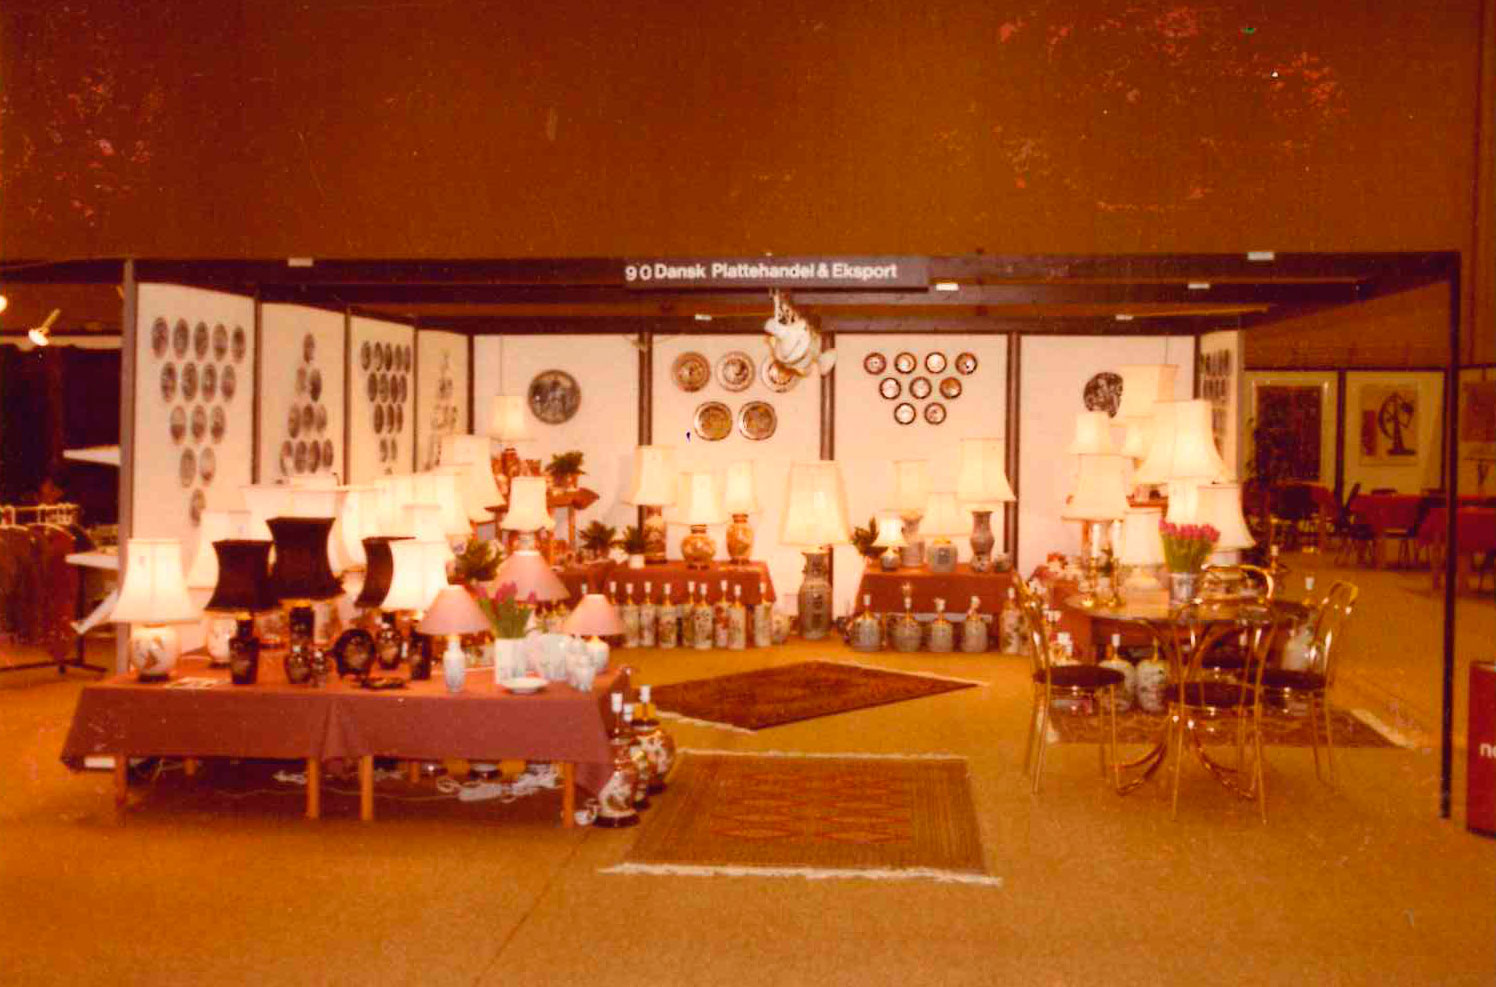 First exhibition with lamps in 1984